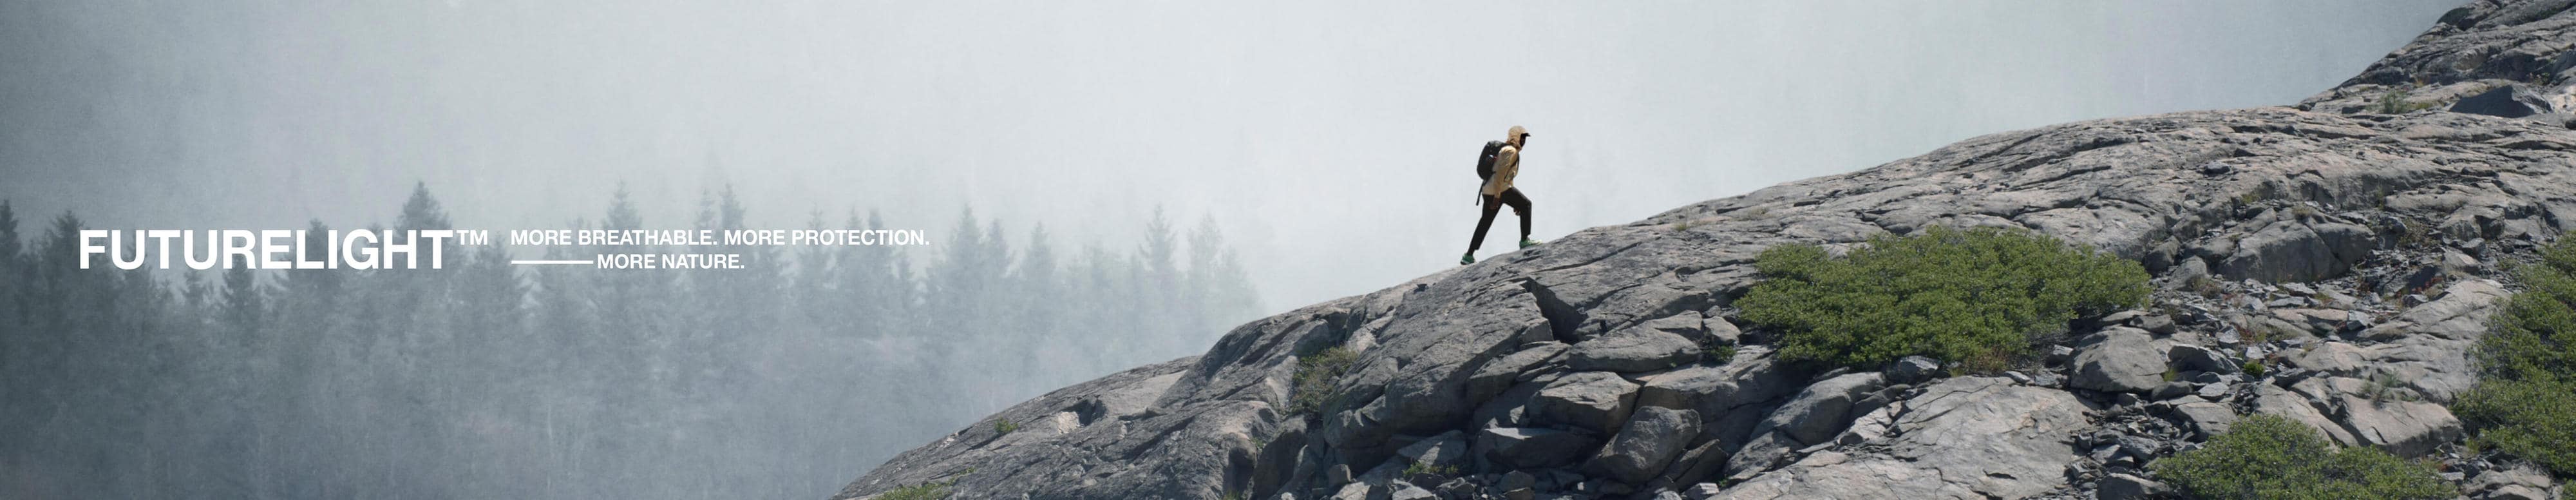 A hiker makes their way towards the summit while wearing the Frontier FUTURELIGHT™ Jacket.  